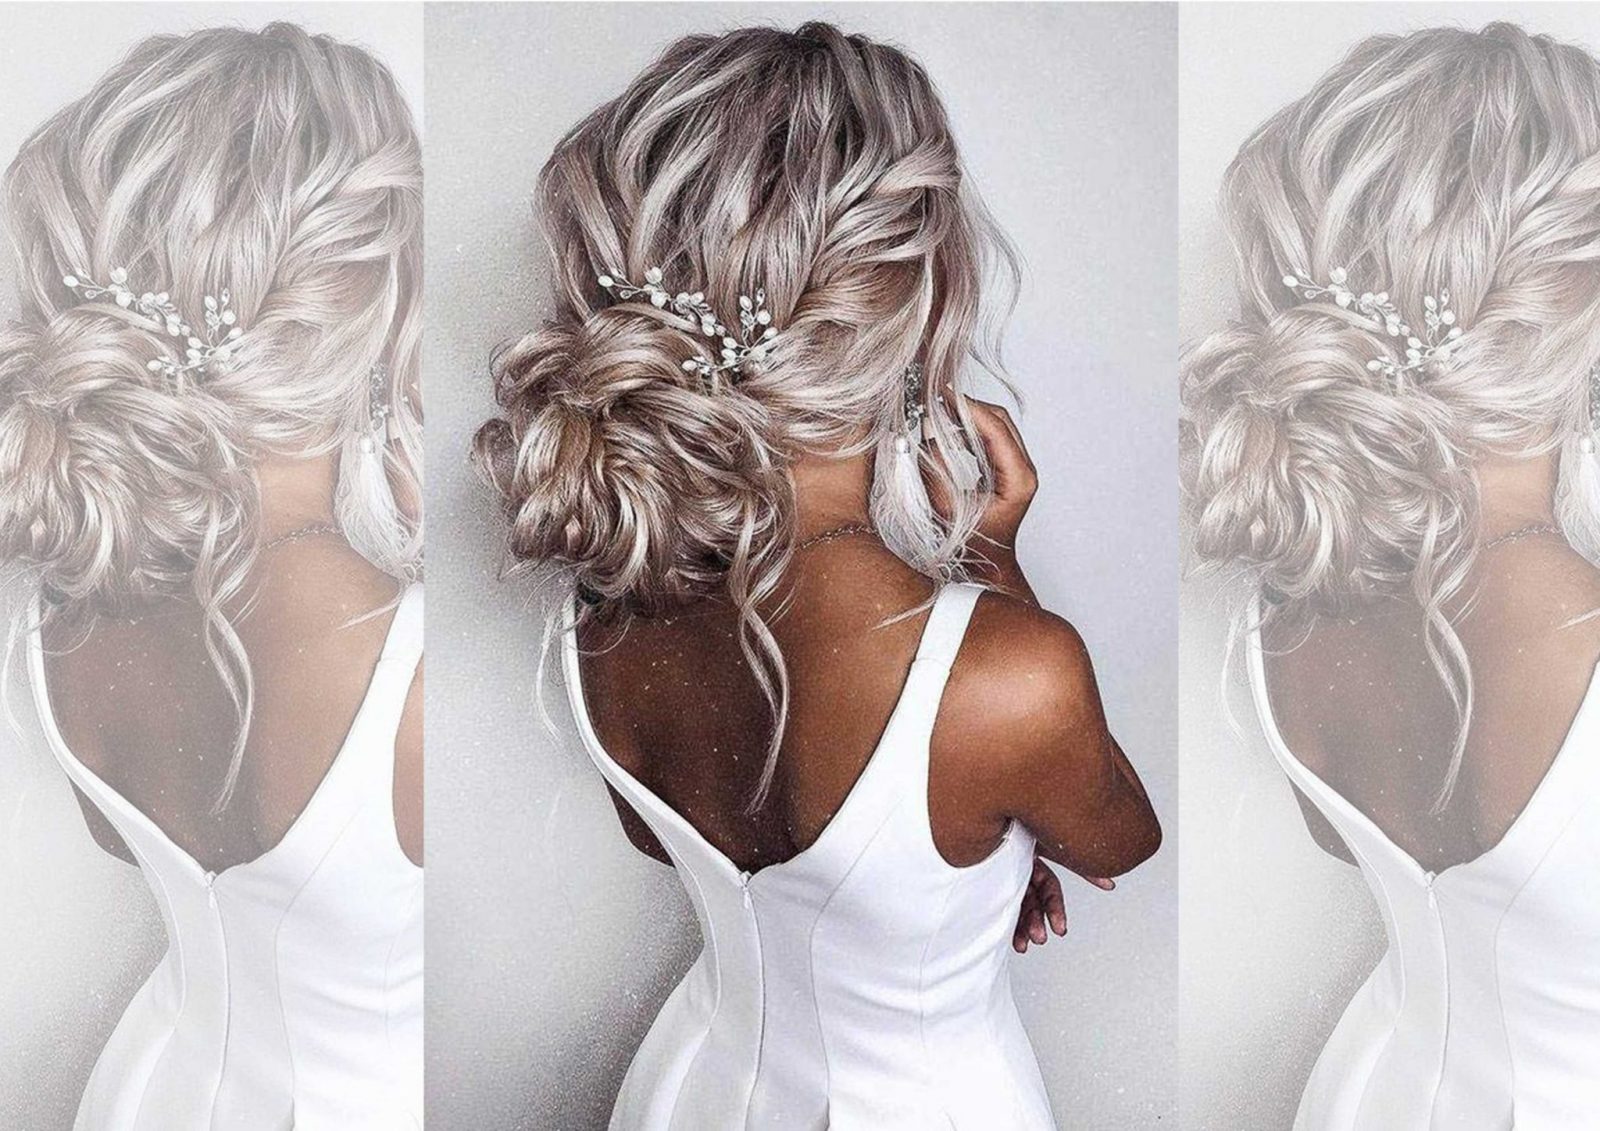 Easy Prom Hairstyle Tutorials [Top YouTube & Style Blogs]